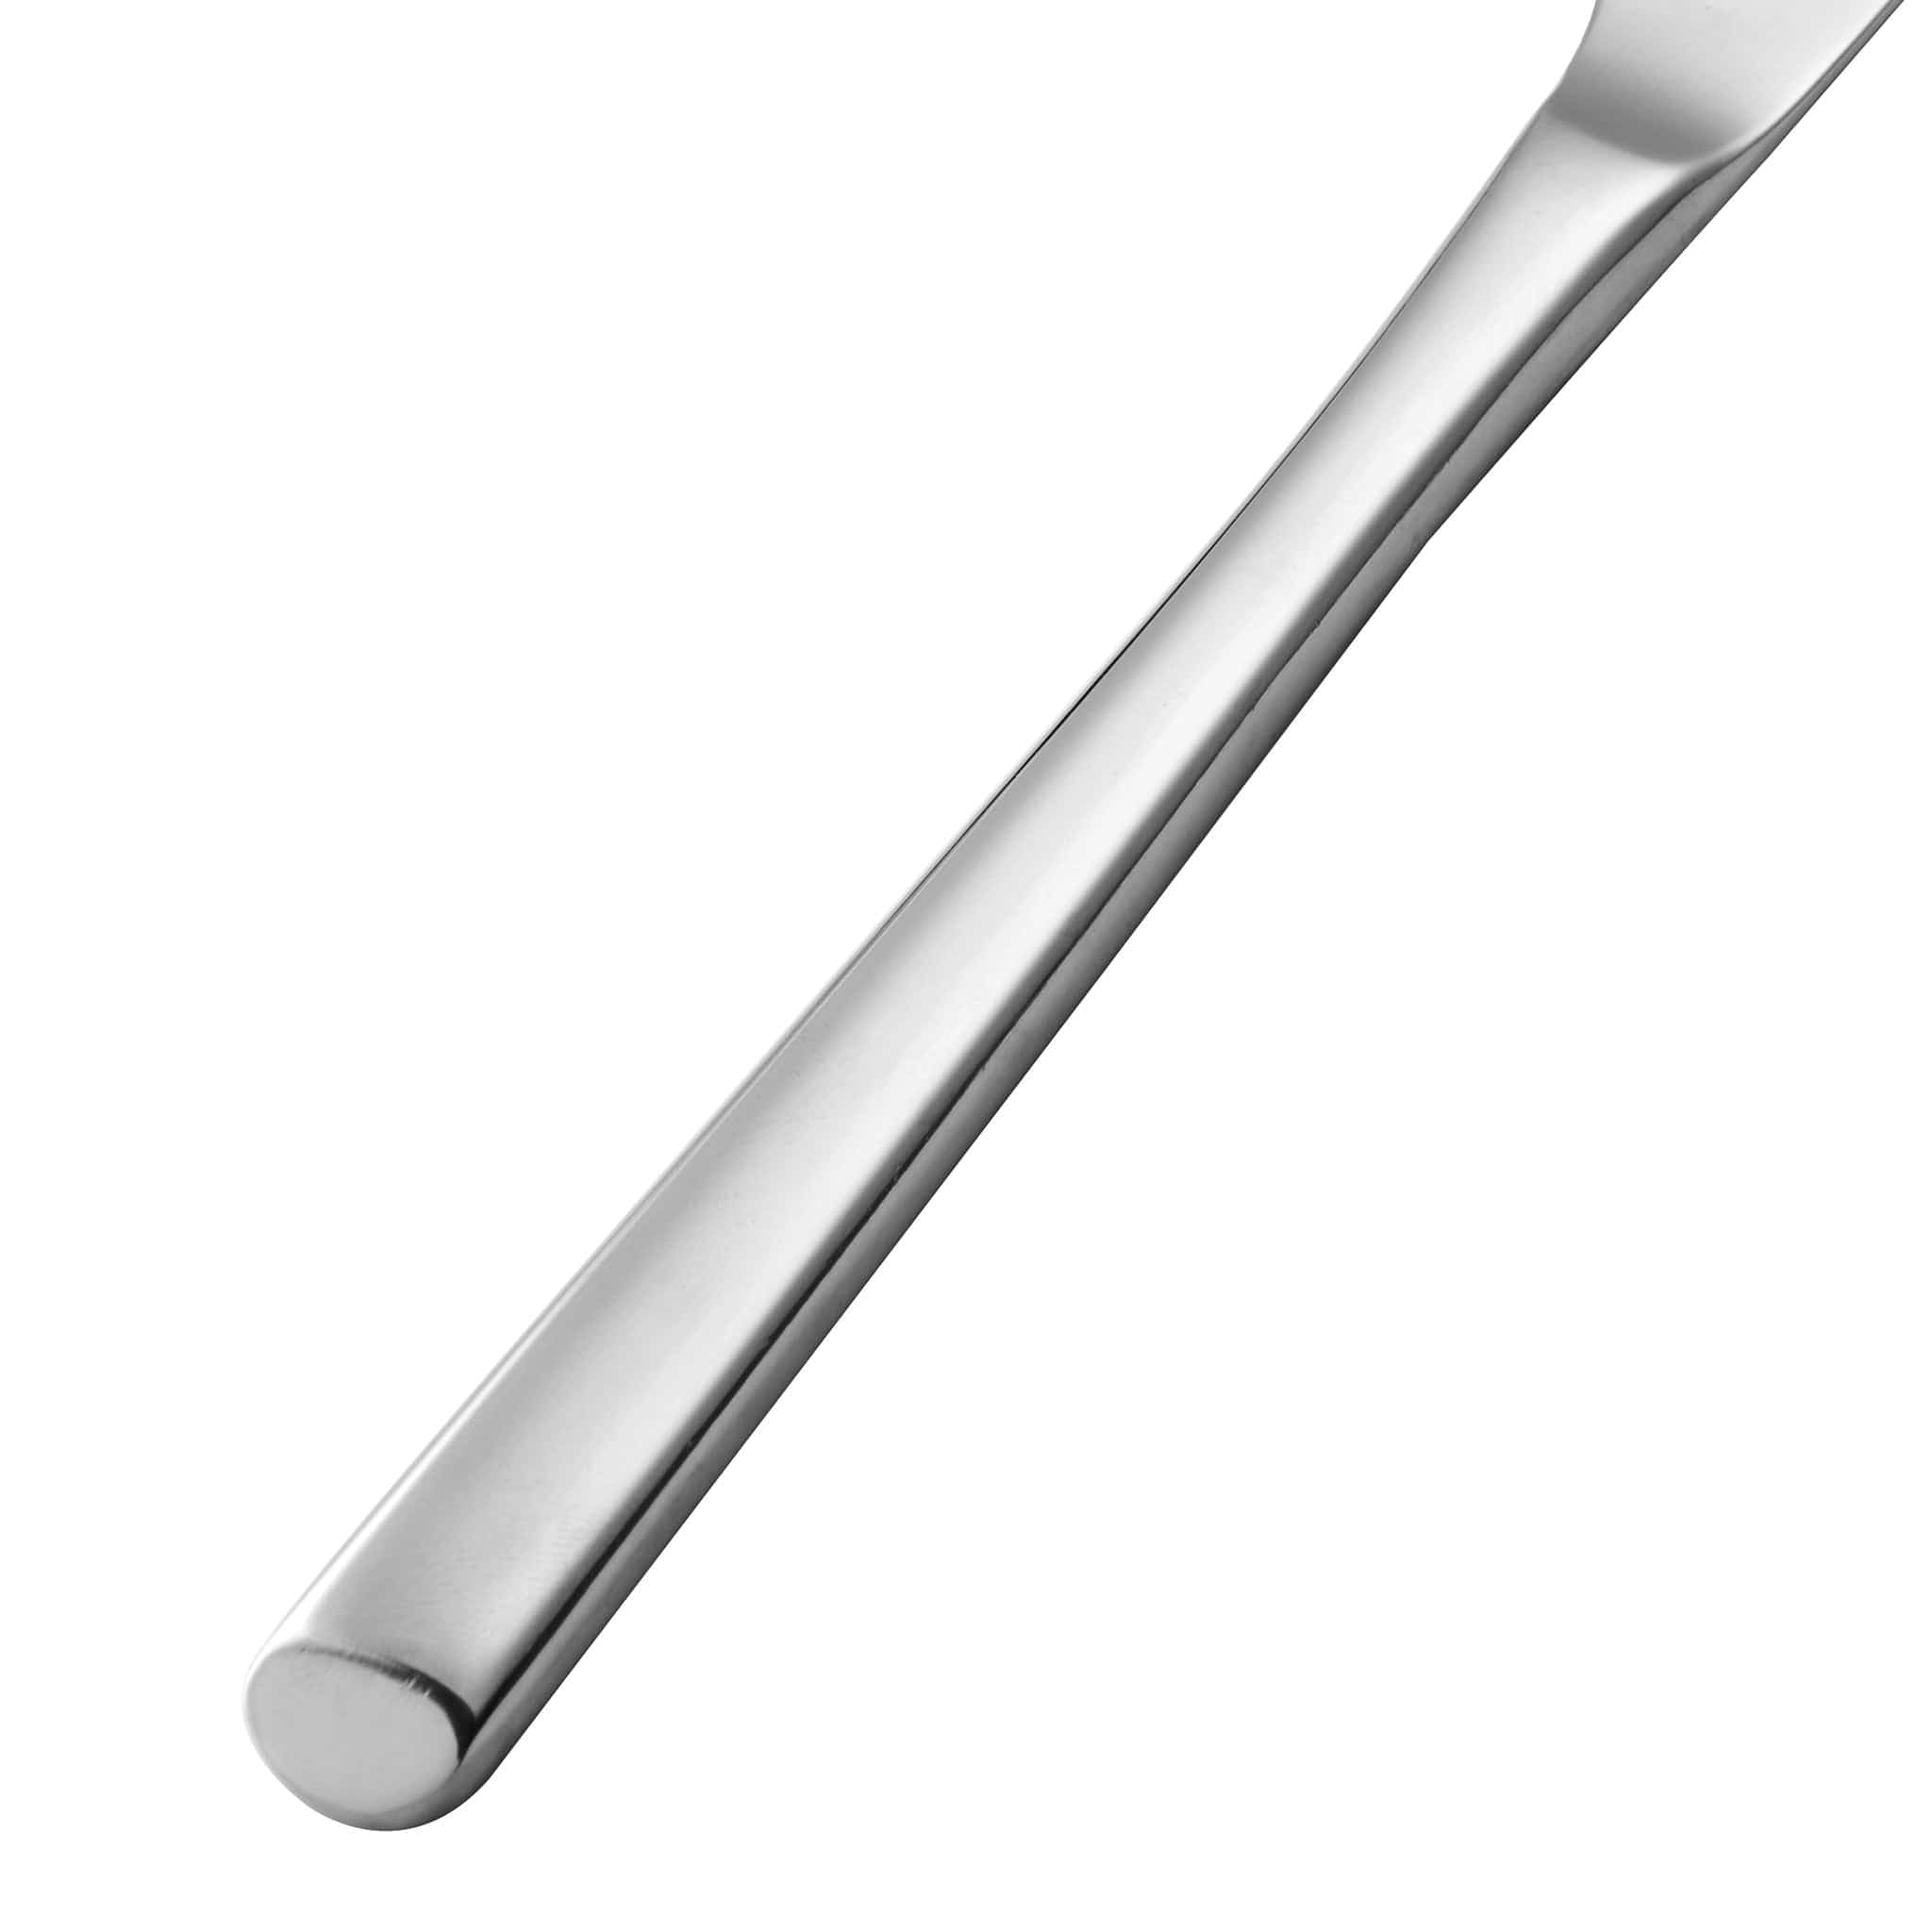 Firenze 18/10 Table Knife 9.8" Stainless Steel